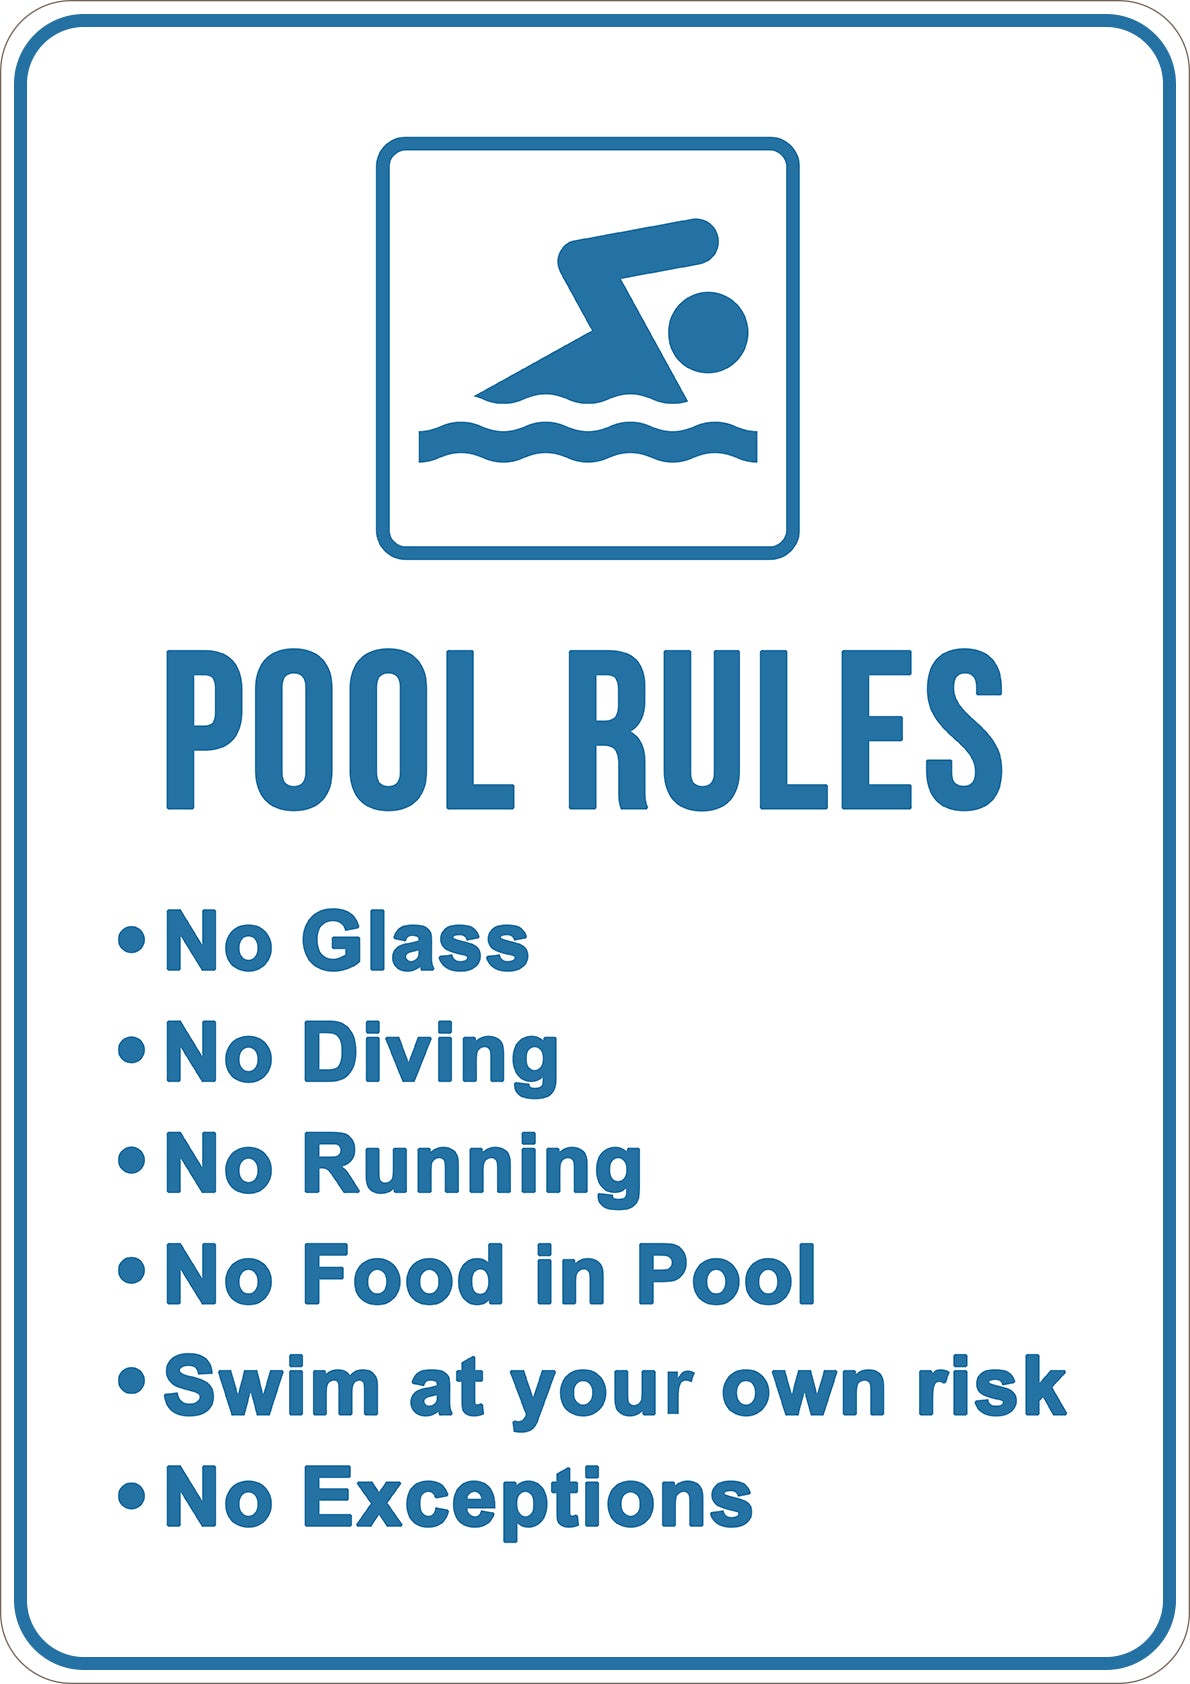 Follow The Pool Rules Printed Sign